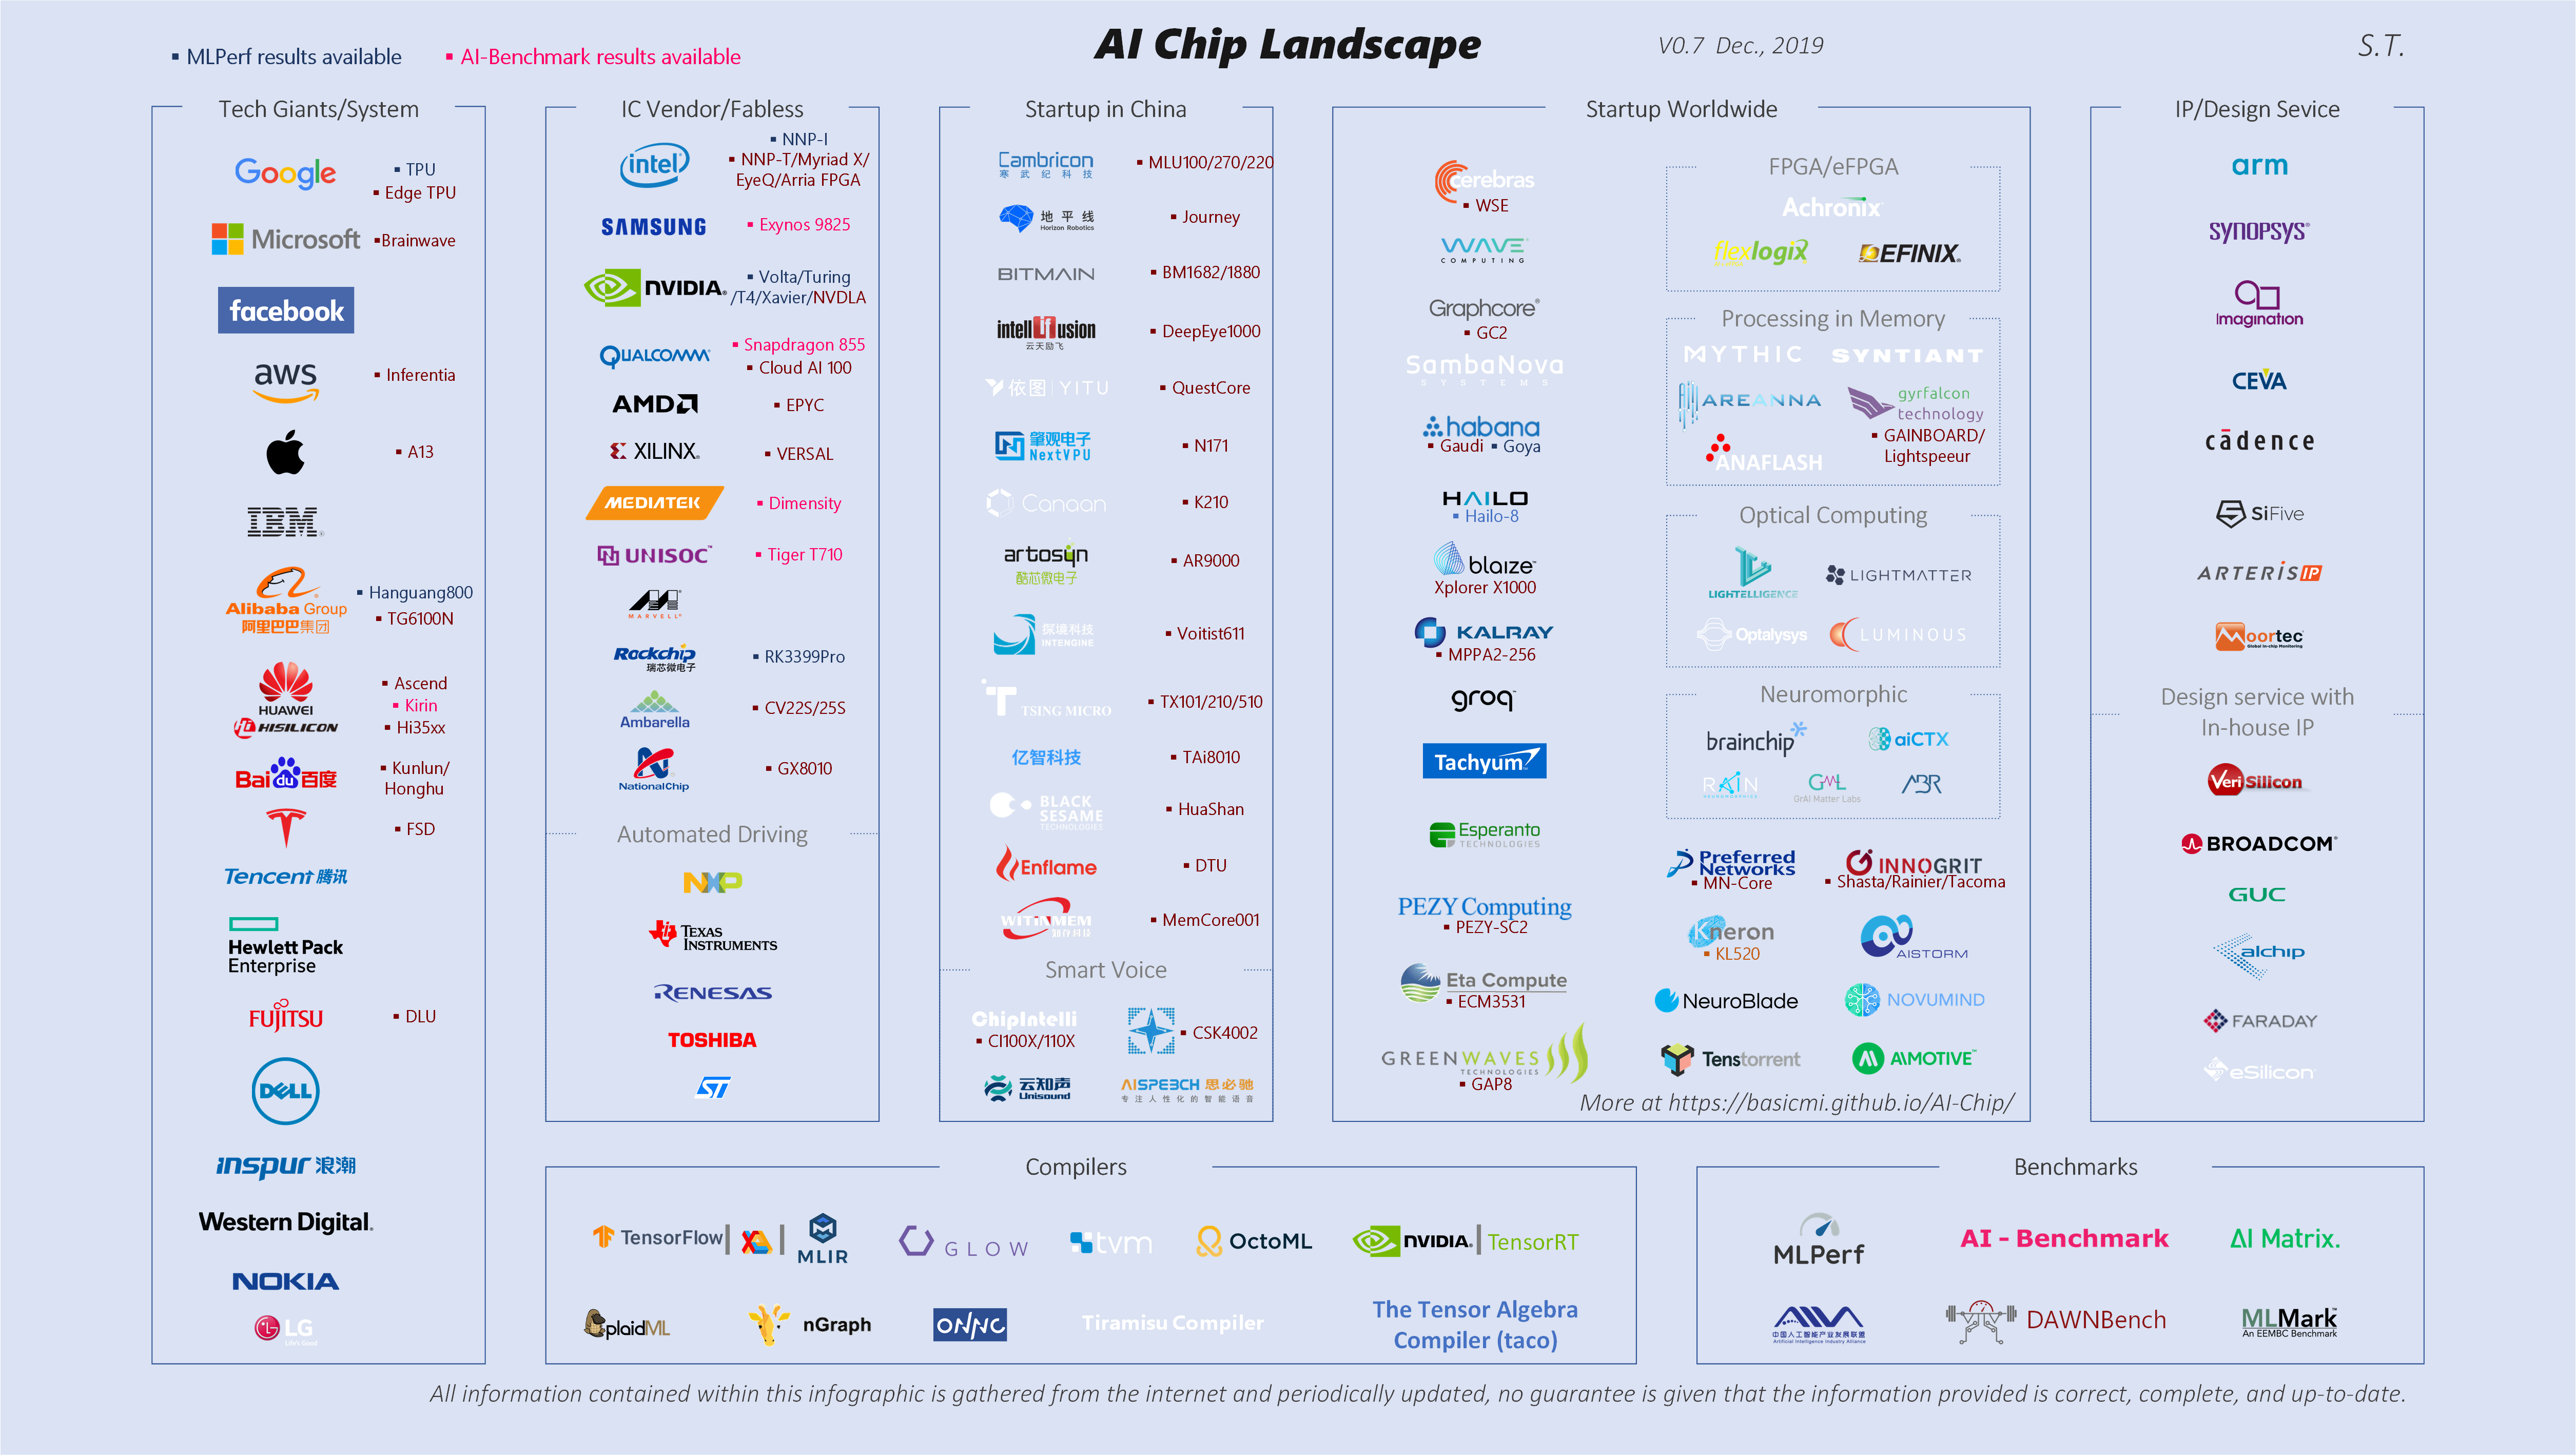 AI tech giants, IC vendors, startups, and more at a glance